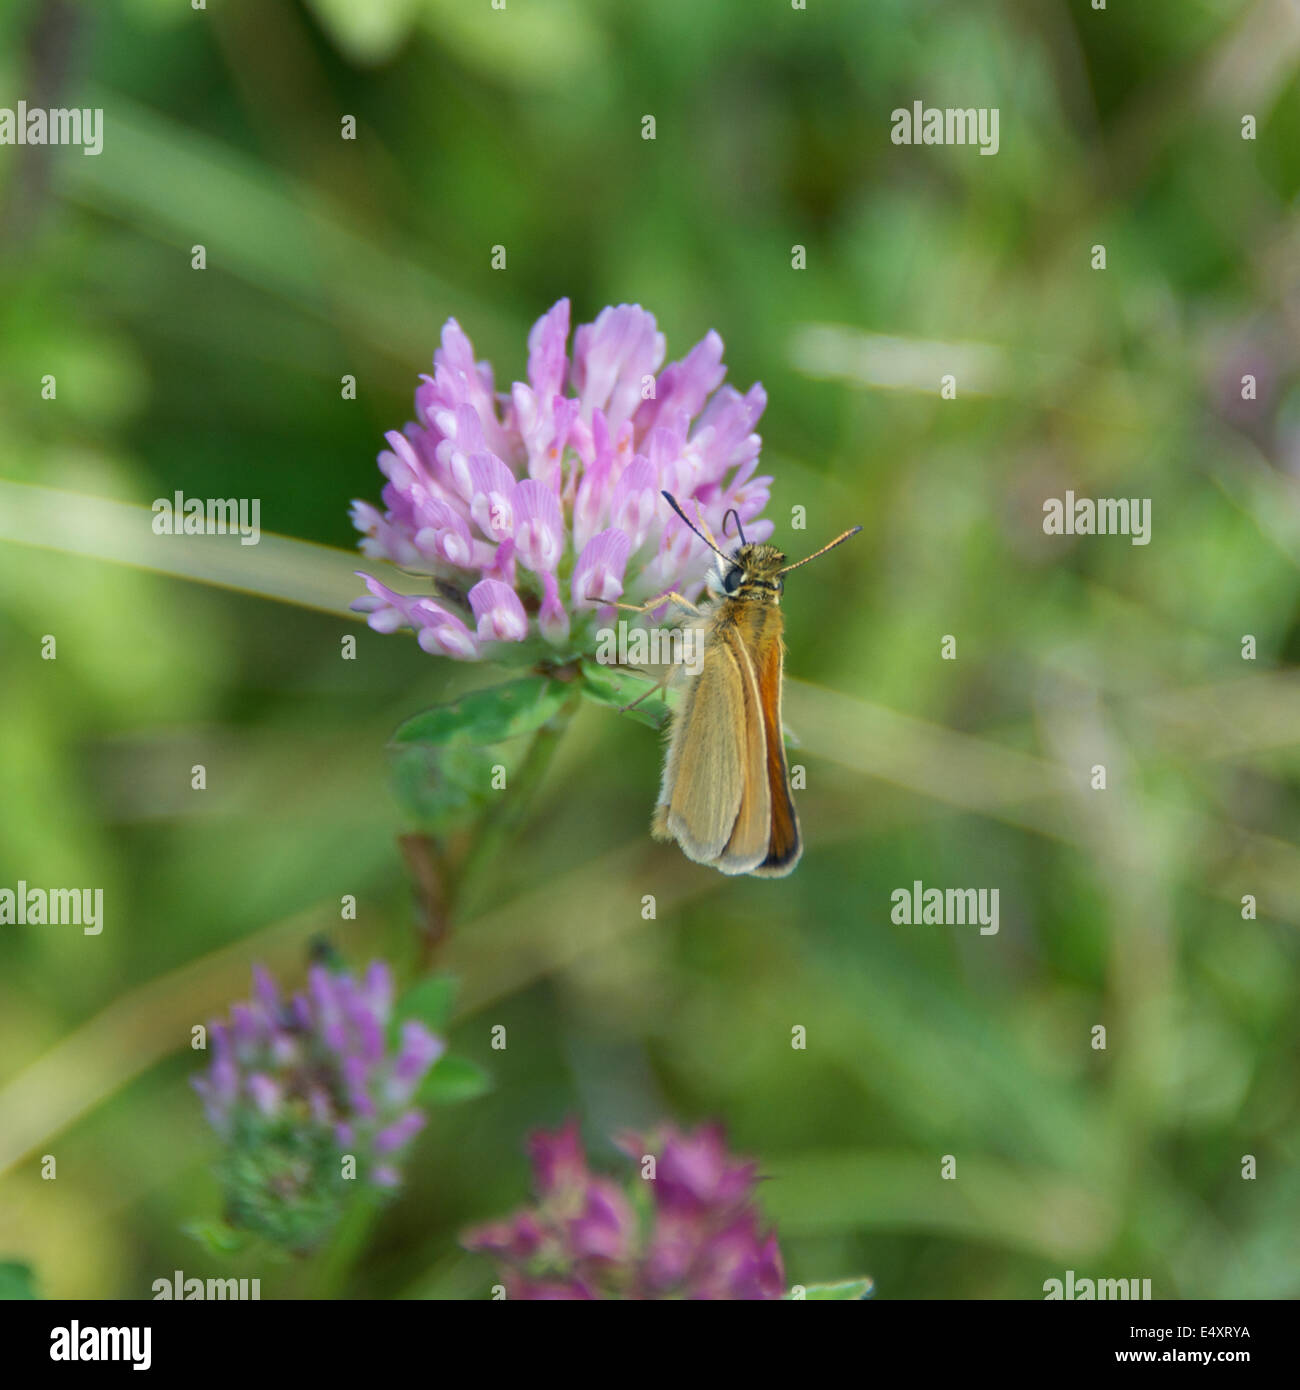 Reigate, Surrey. 17th July, 2014. The UK Big Butterfly Count takes place 19th July to 10th August. Butterflies on the North Downs, Thursday 17th July 2014. A Large Skipper Butterfly 'Ochlodes sylvanus' rests on a wild clover flower in a meadow at the foot of the North Downs at Reigate, Surrey  Credit:  Lindsay Constable / Alamy Live News Stock Photo